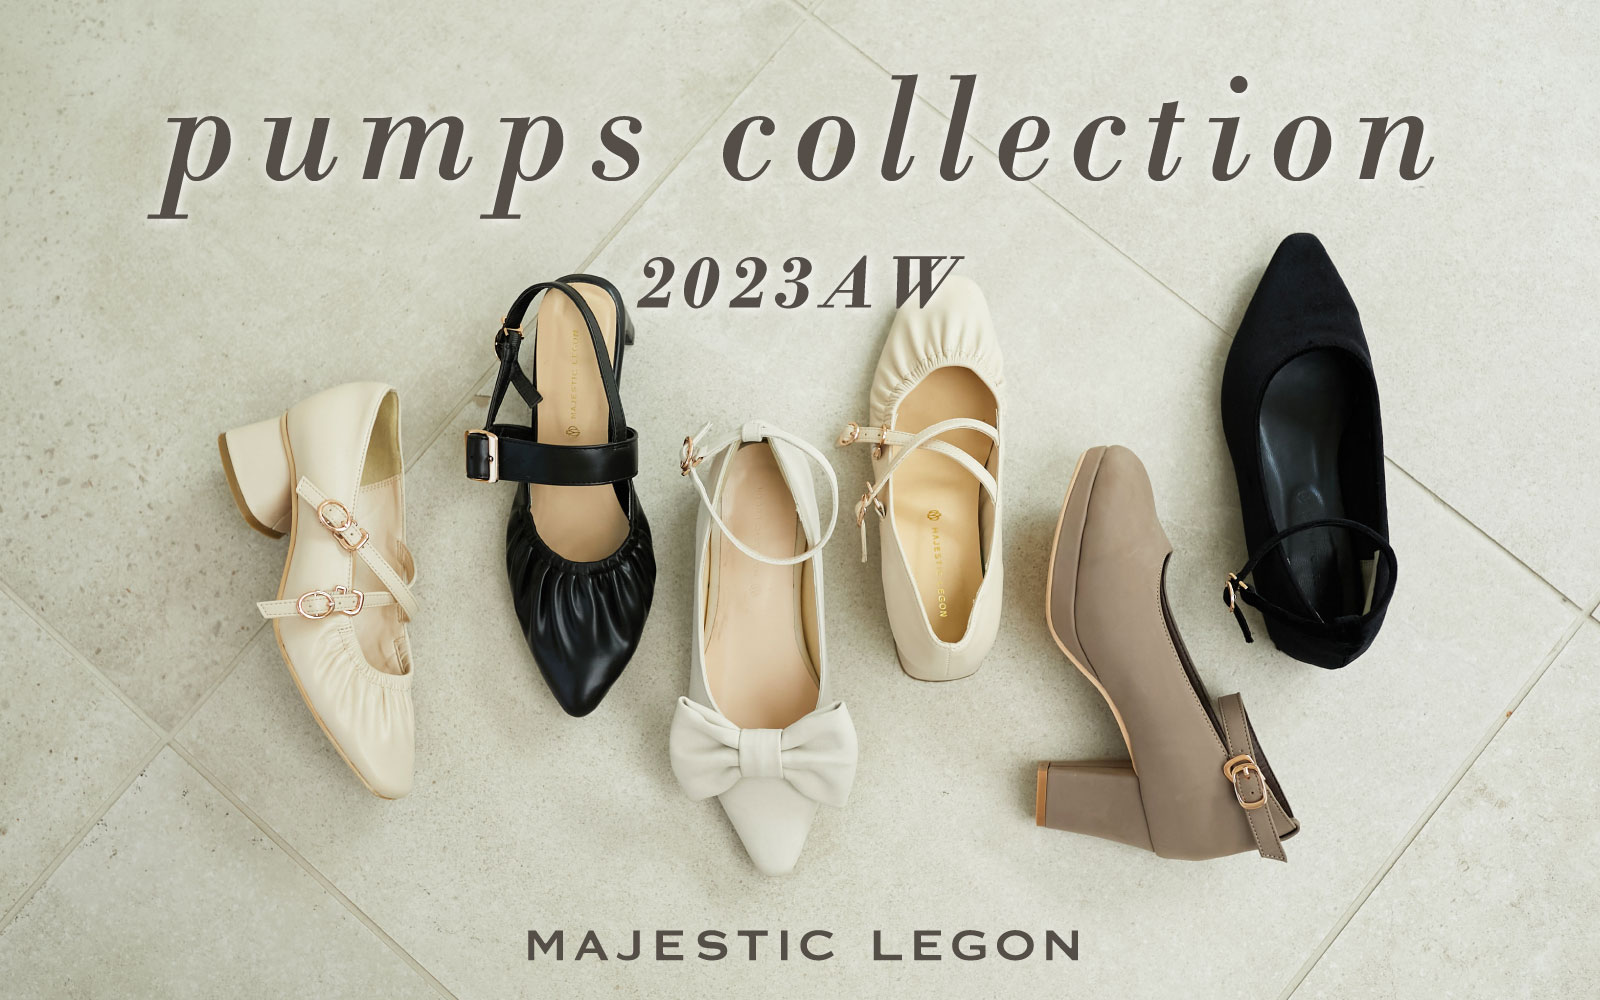 2023 AW pumps collection